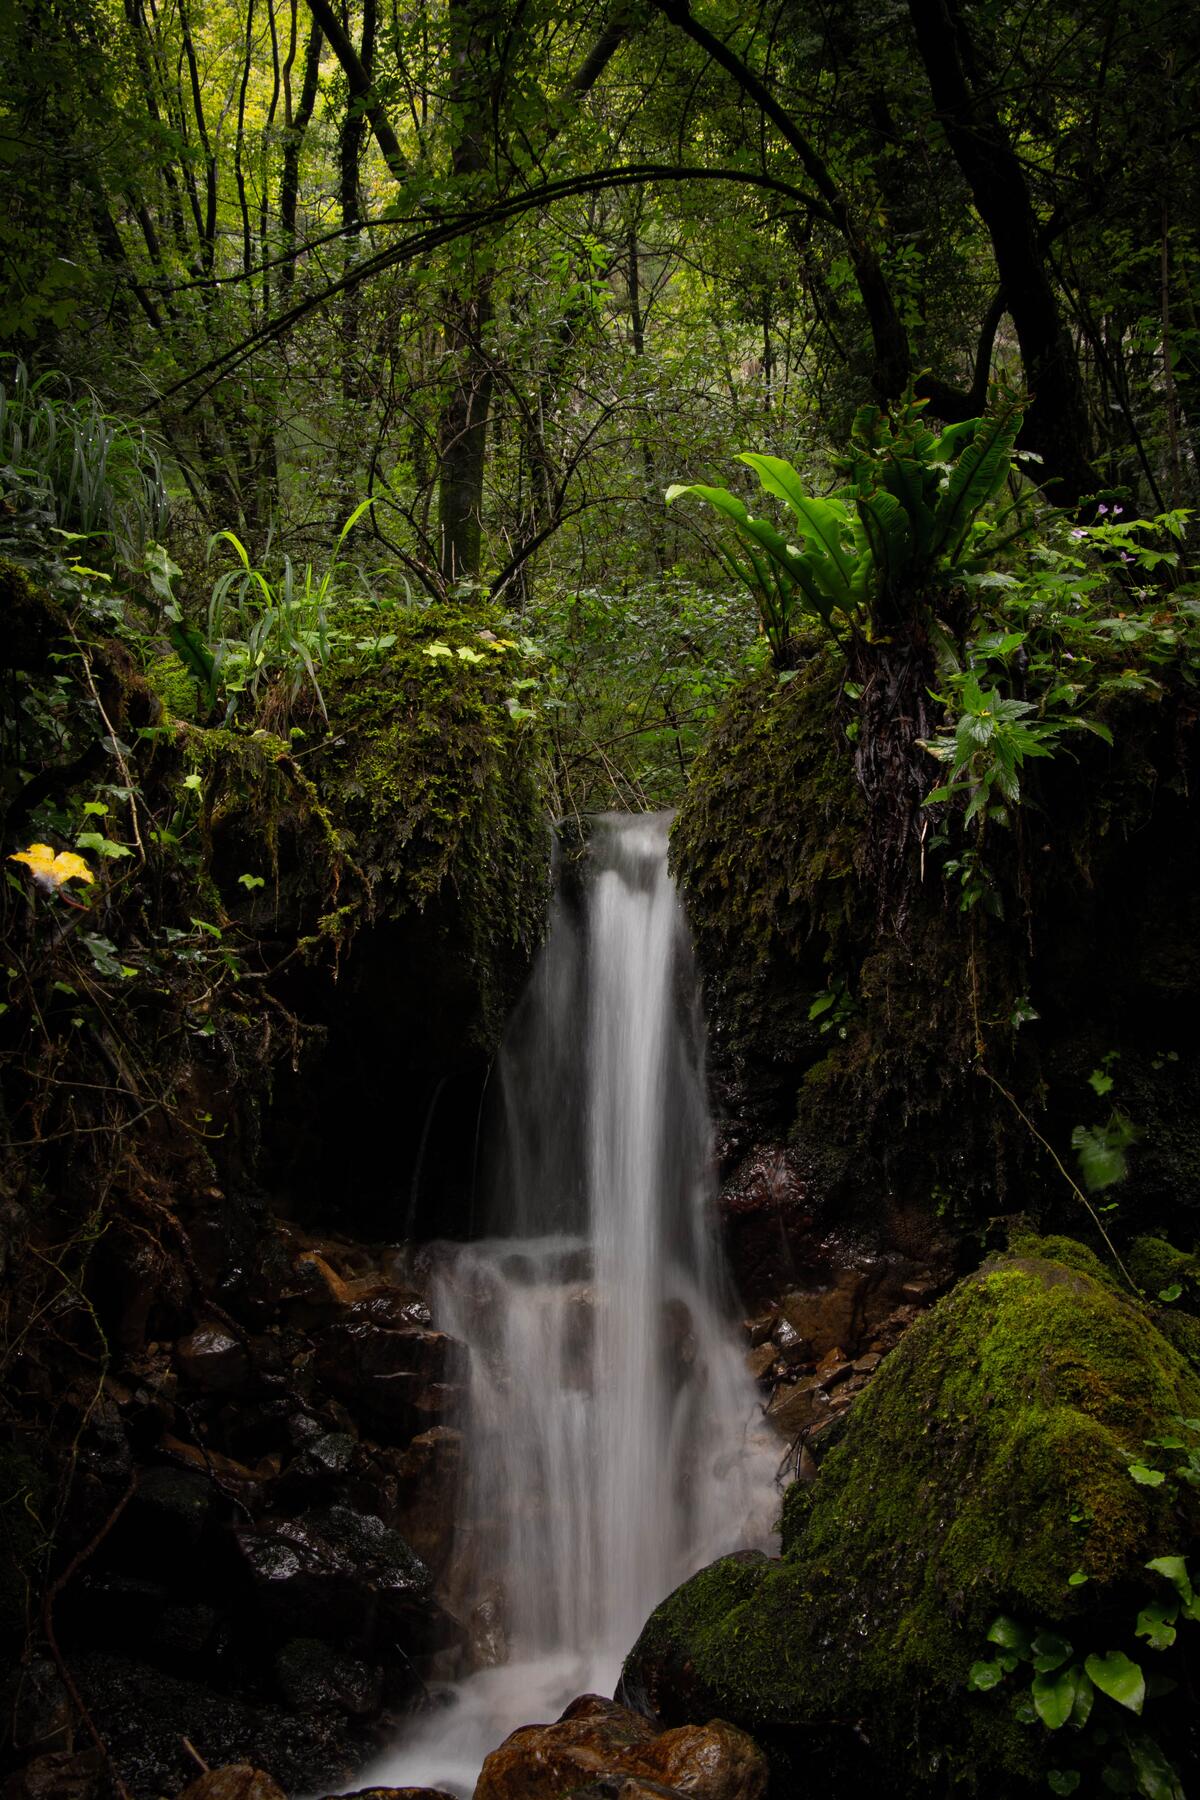 A waterfall in an impenetrable jungle.